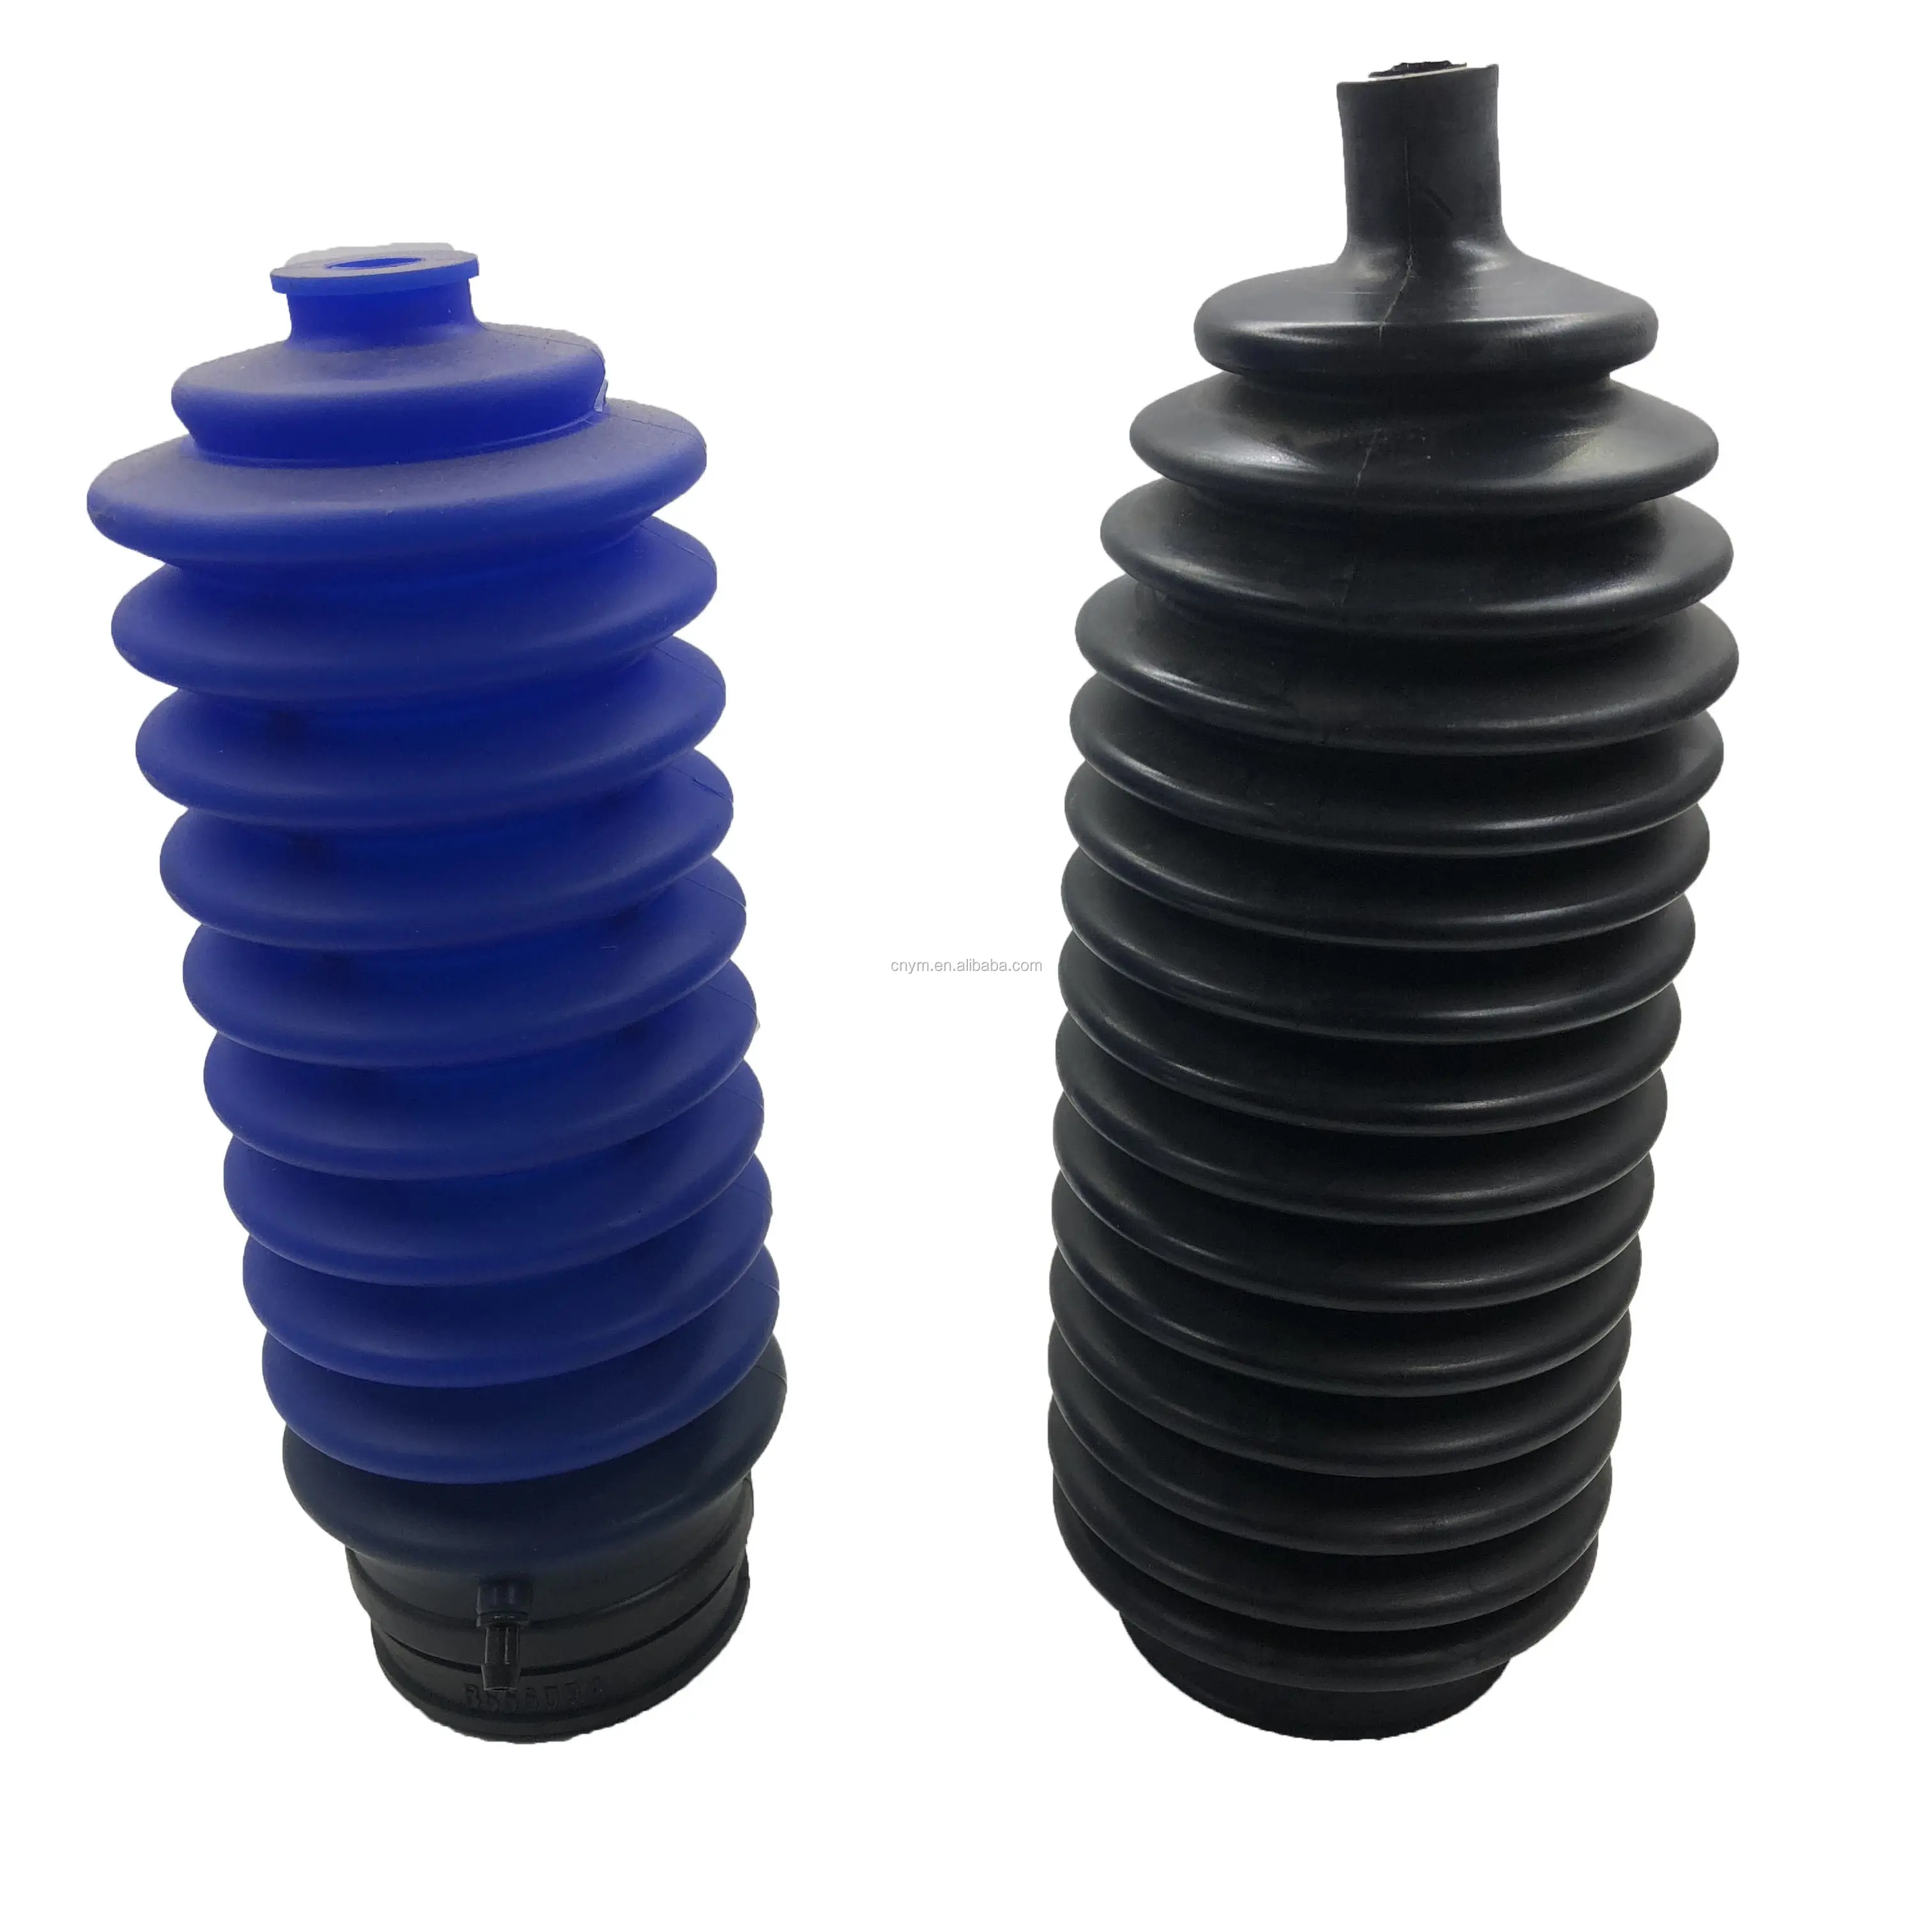 Rubber bellows silicone epdm nbr rubber bellows dust cover